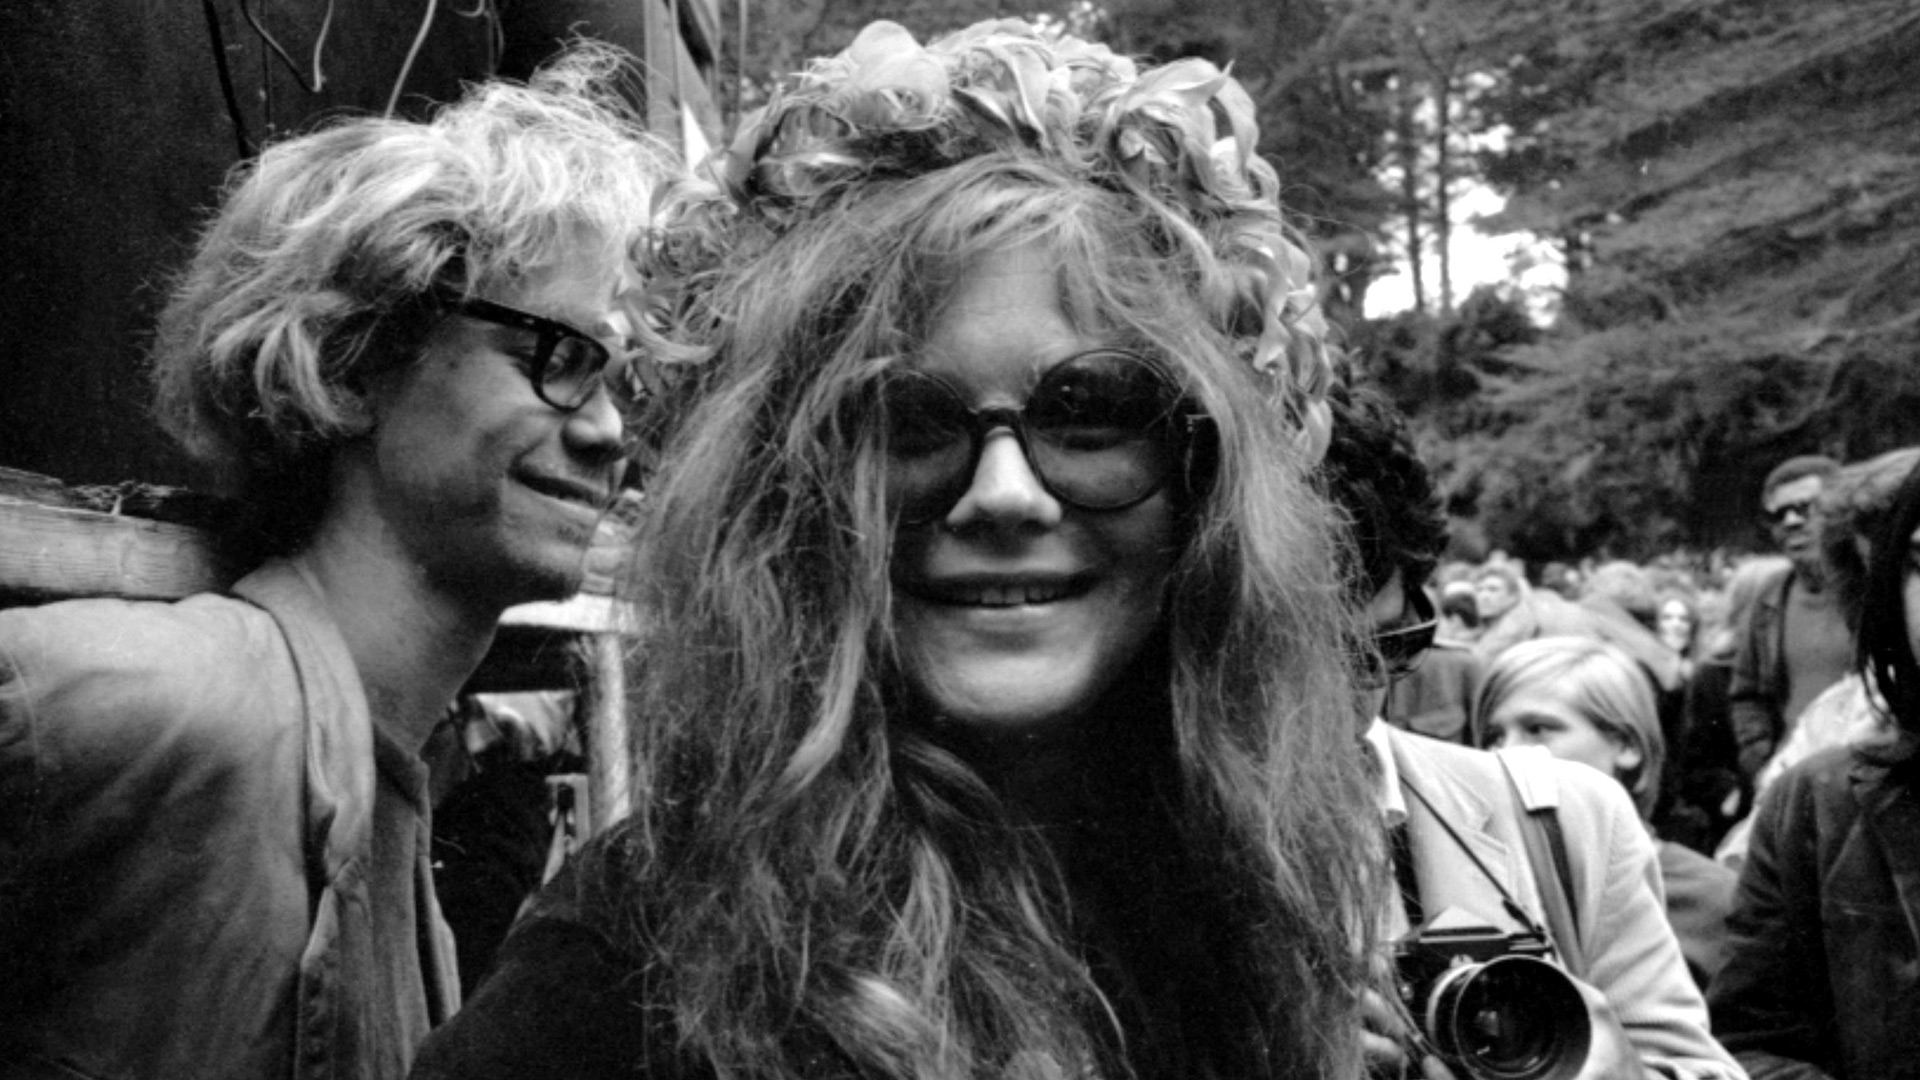 August 16, 1969: Janis Joplin Played a Historic Set at Woodstock